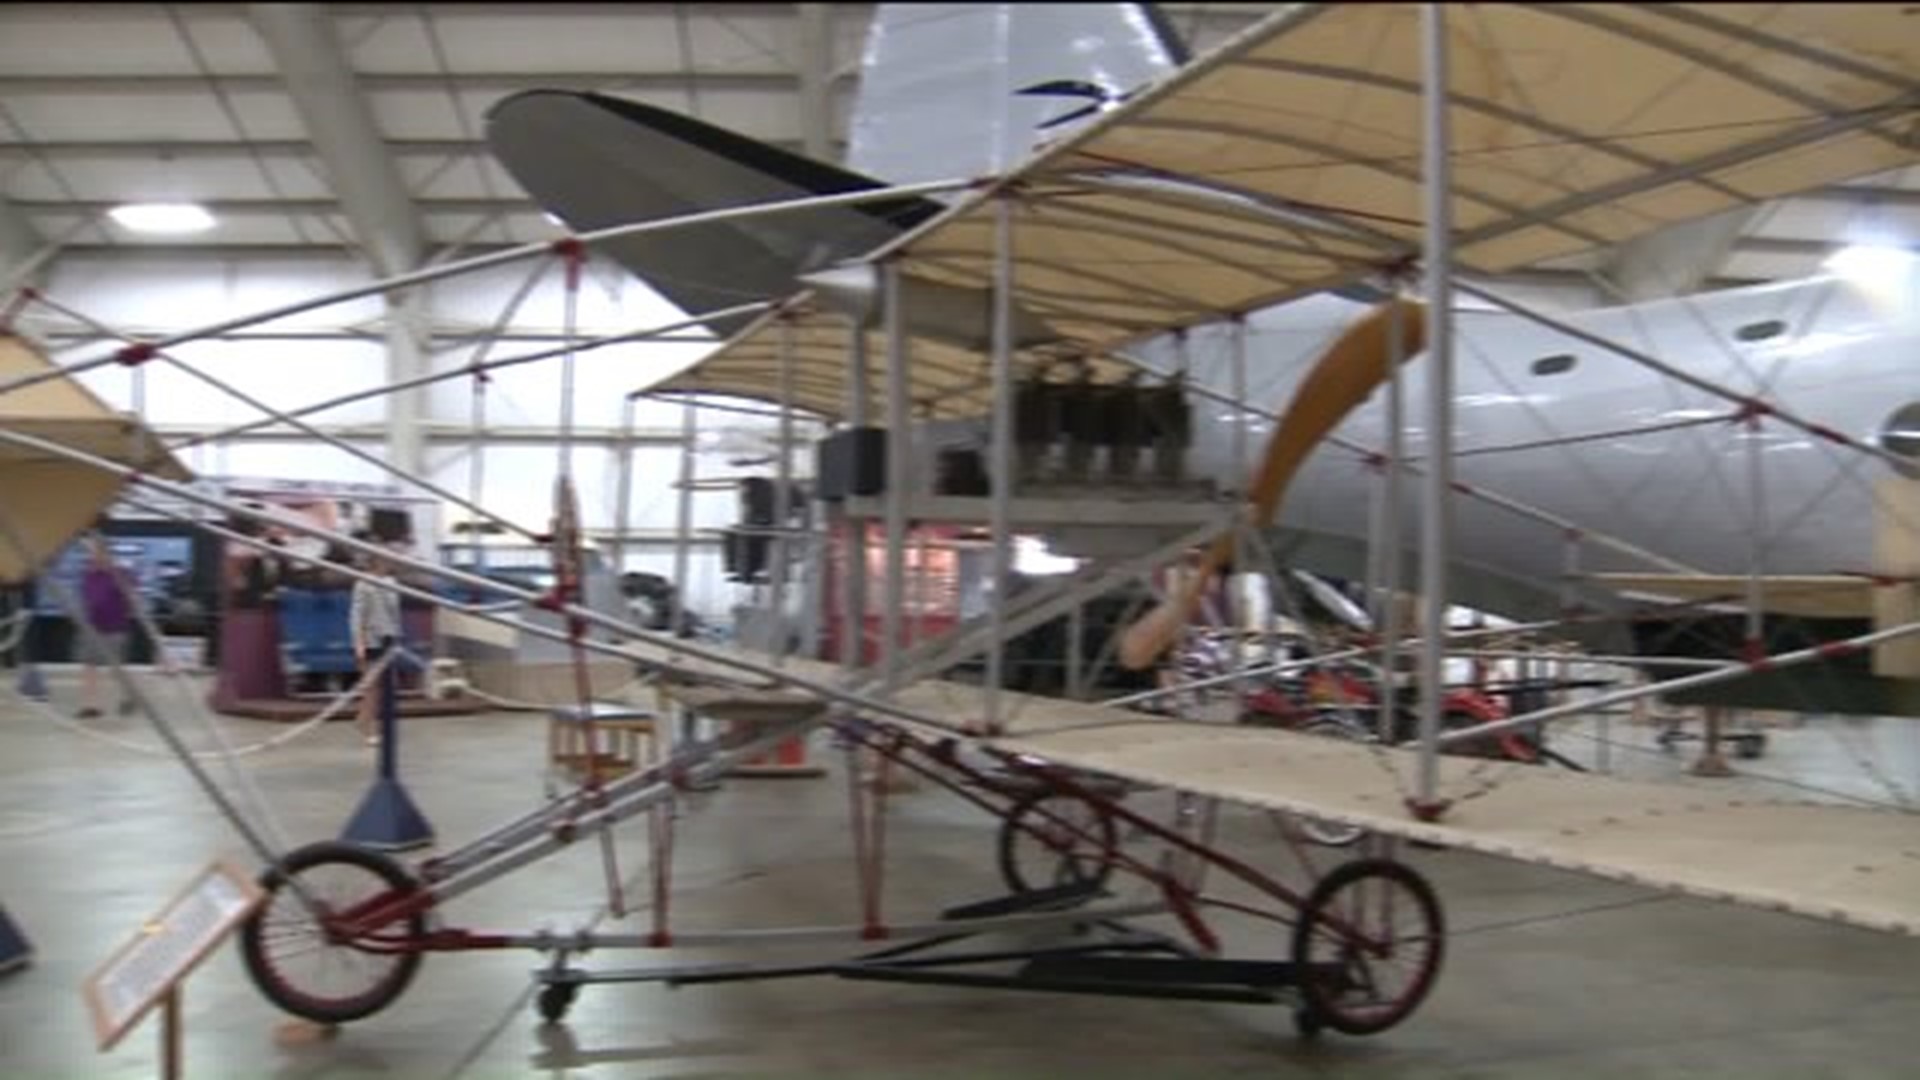 Hidden History: A special plane at the New England Air Museum